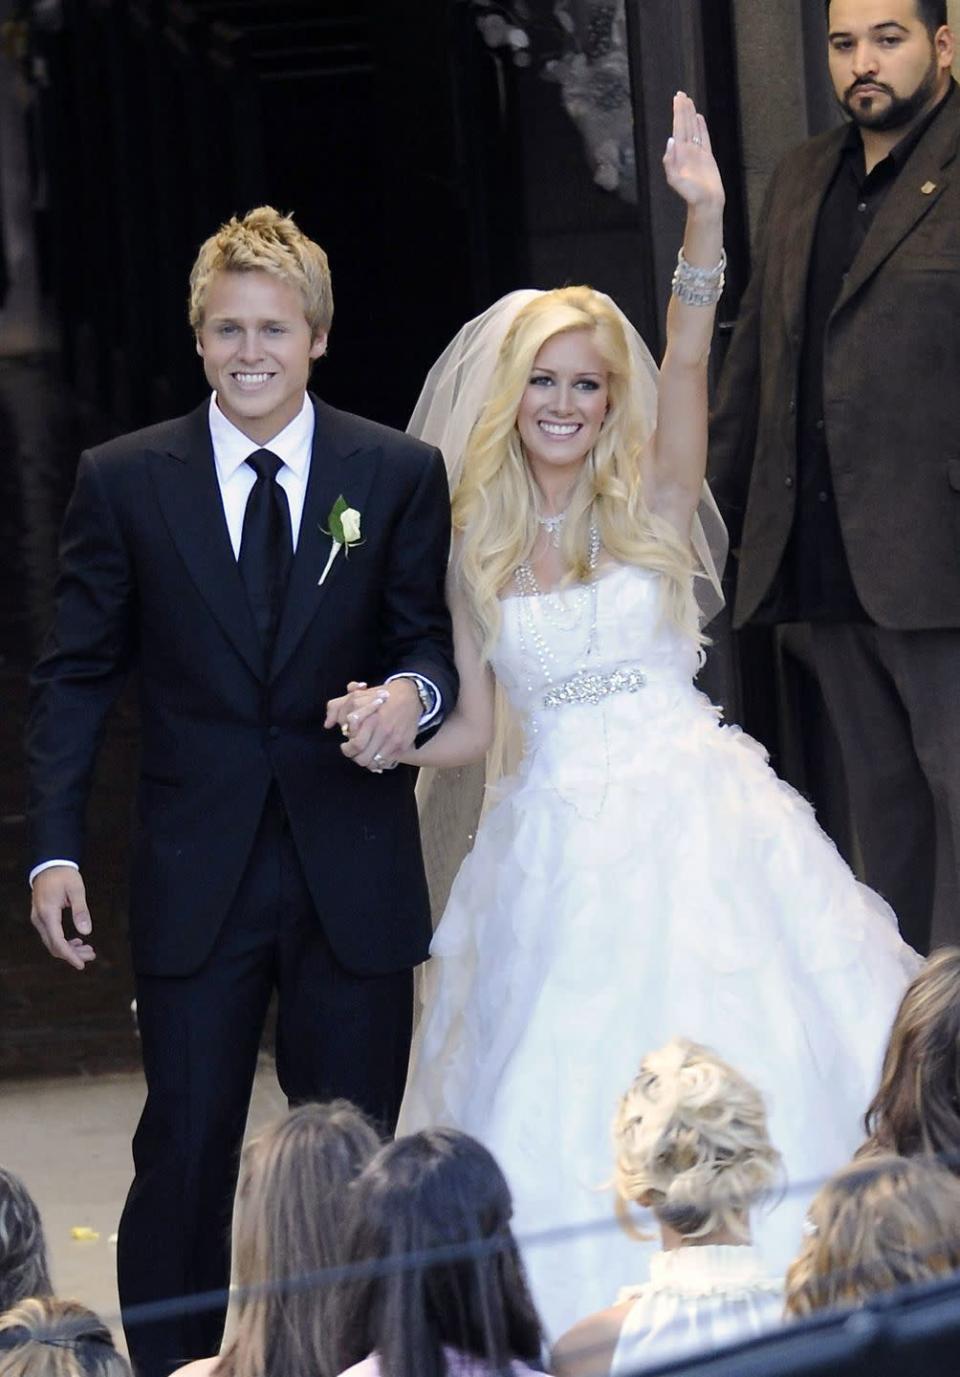 <p>In a moment that would be viewed by millions on reality TV, Heidi Montag and Spencer Pratt exchanged their vows in front of a dramatic crowd on MTV's <em>The Hills</em>. Leading up to the moment, there were rumors that Heidi would design her own gown, but for the her big day she wore a <a href="https://www.glamour.com/story/heidi-montags-wedding-dress-pa" rel="nofollow noopener" target="_blank" data-ylk="slk:Monique Lhuillier" class="link ">Monique Lhuillier</a> dress.</p>